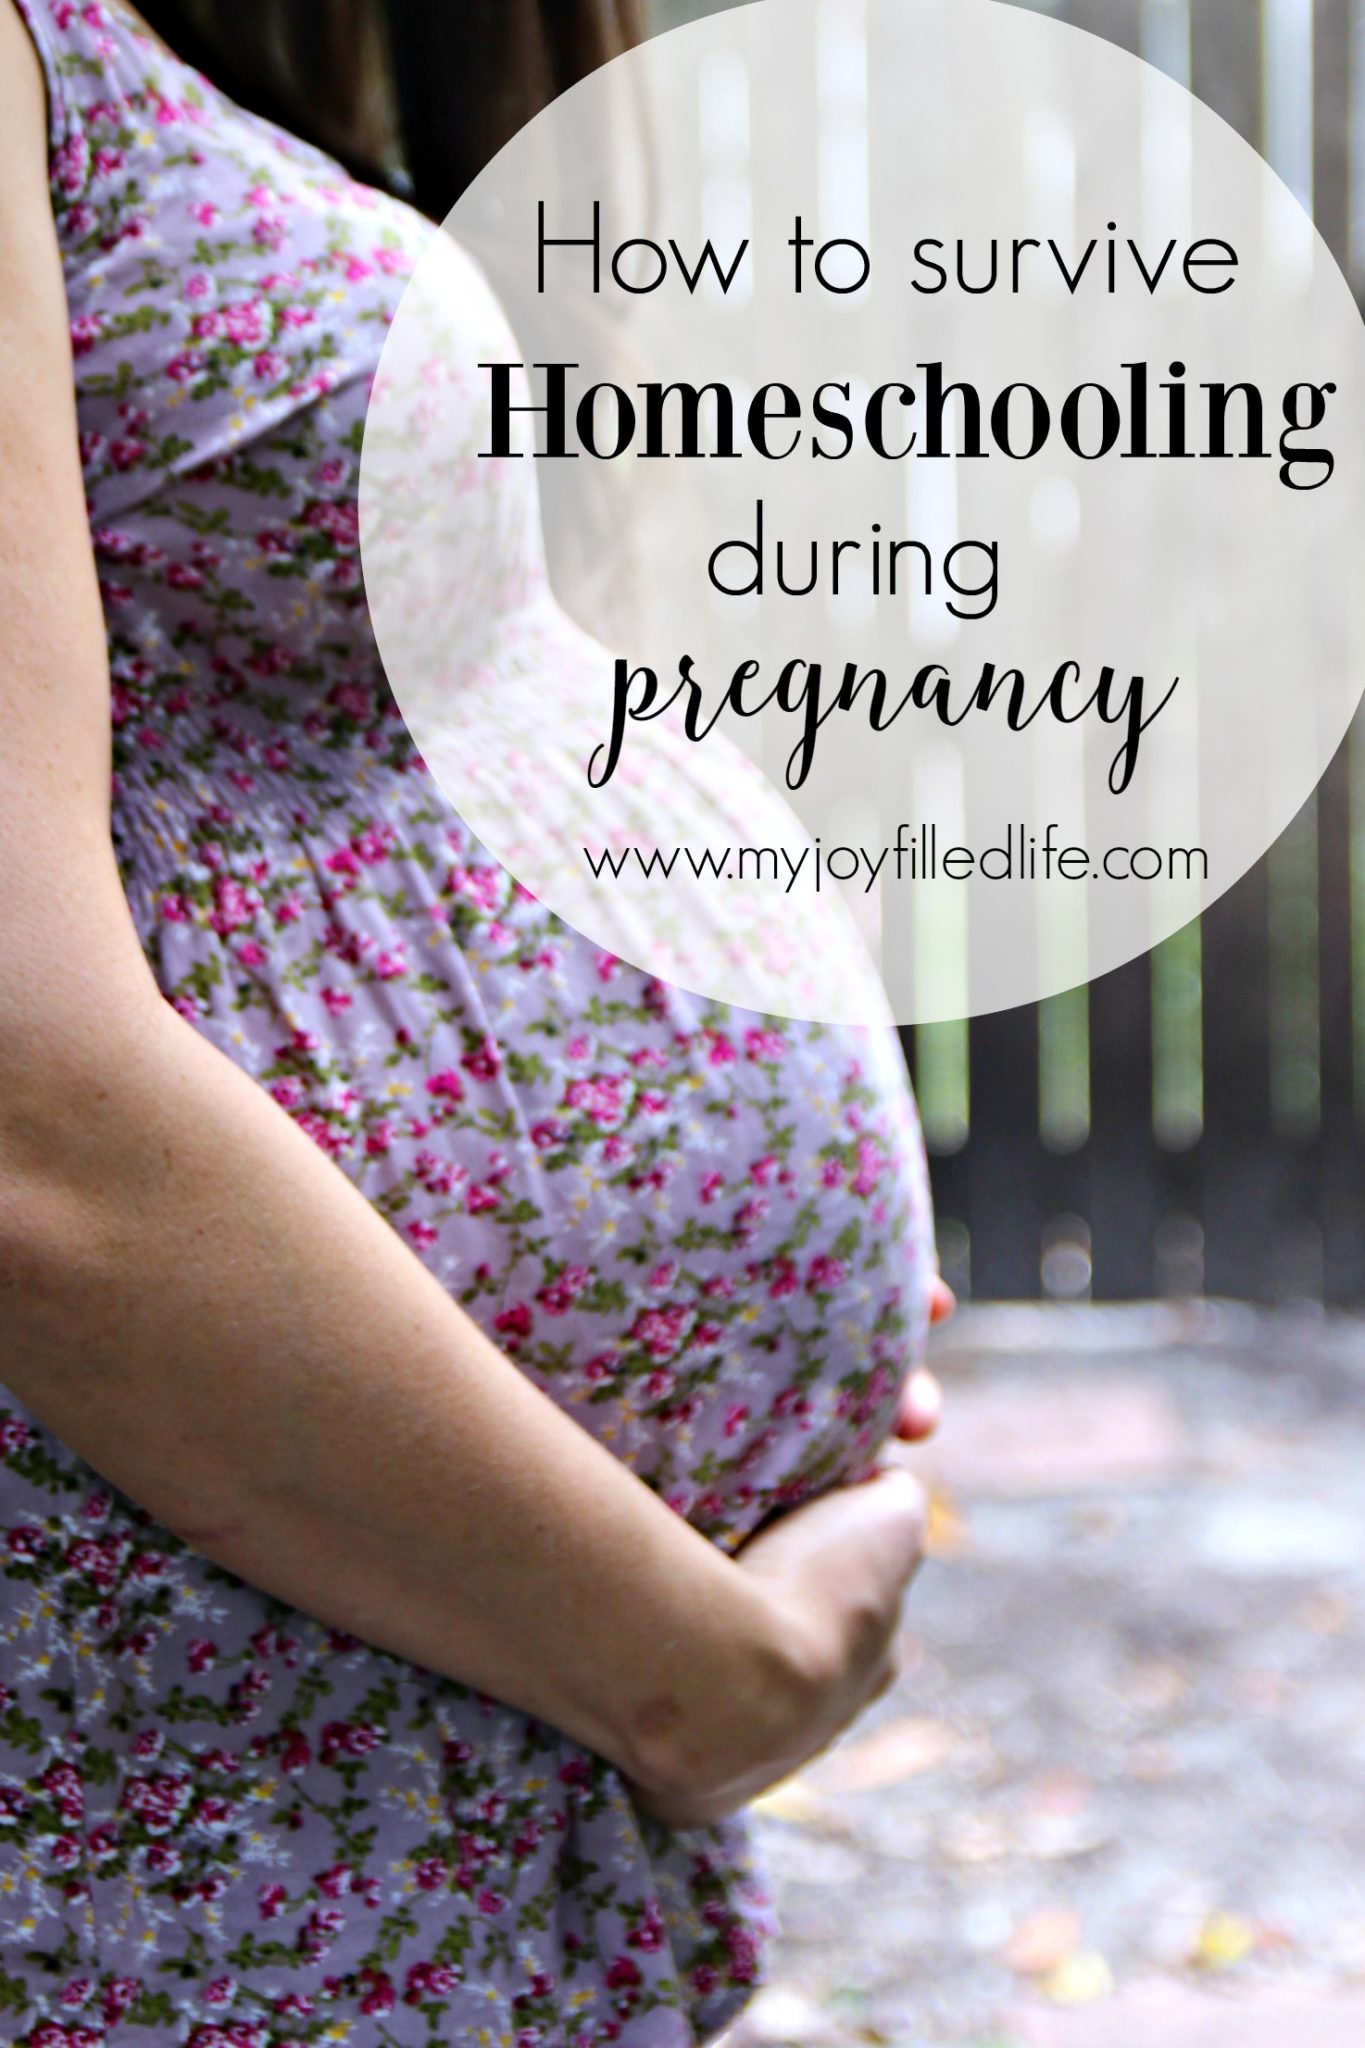 How to Survive Homeschooling During Pregnancy